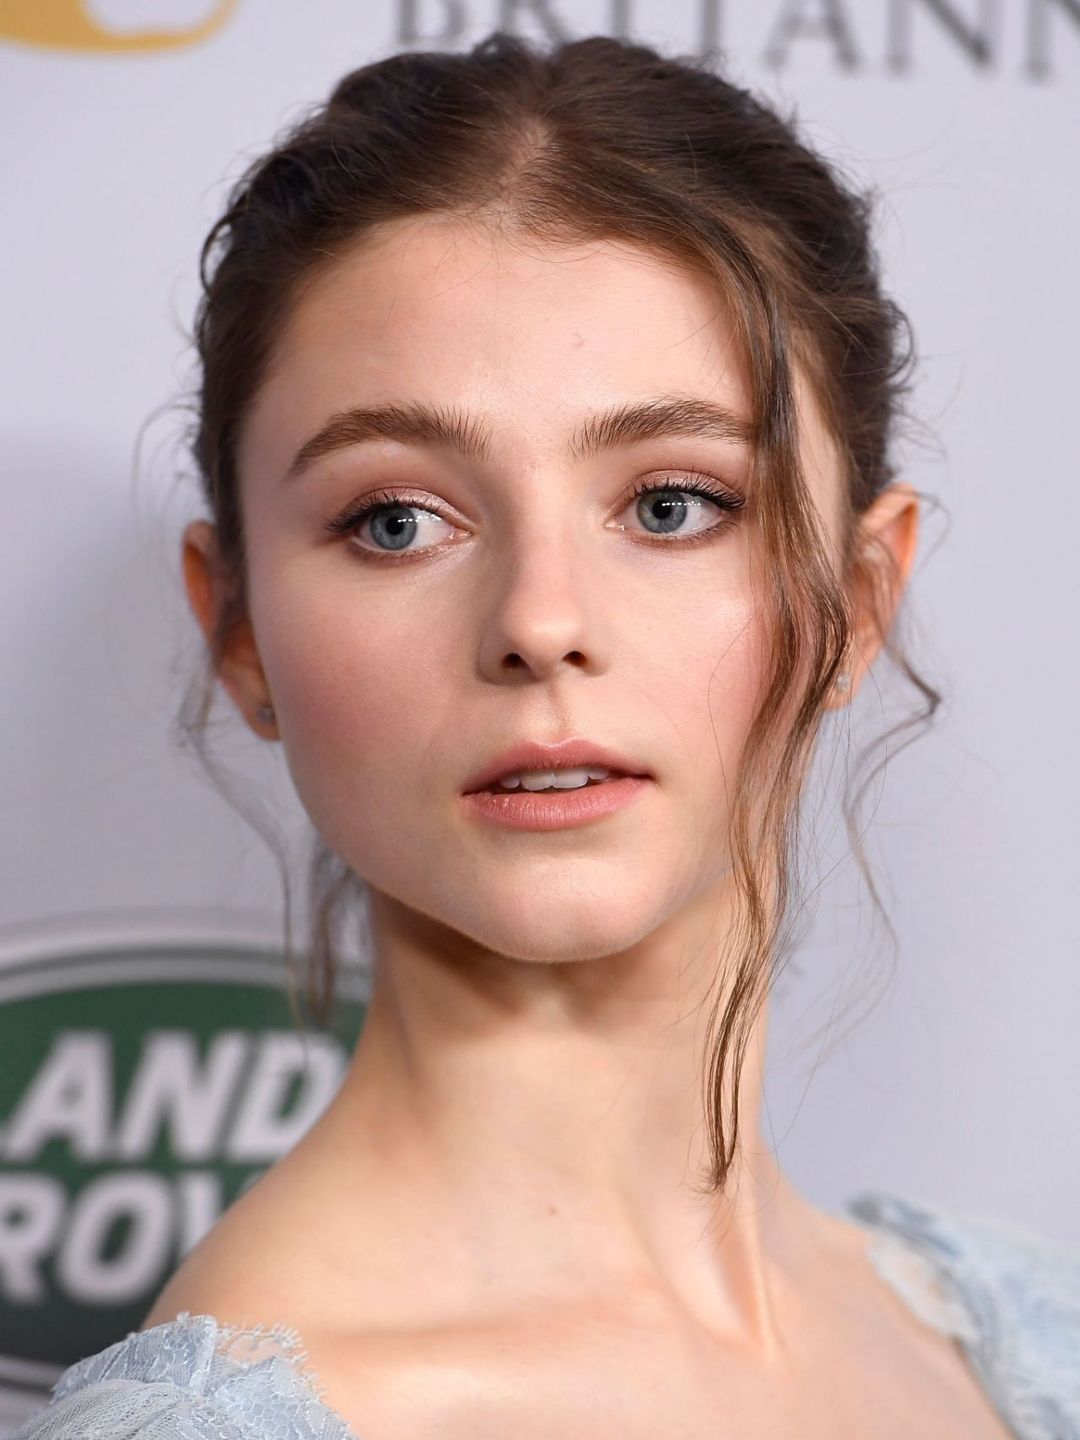 Thomasin McKenzie who is her mother